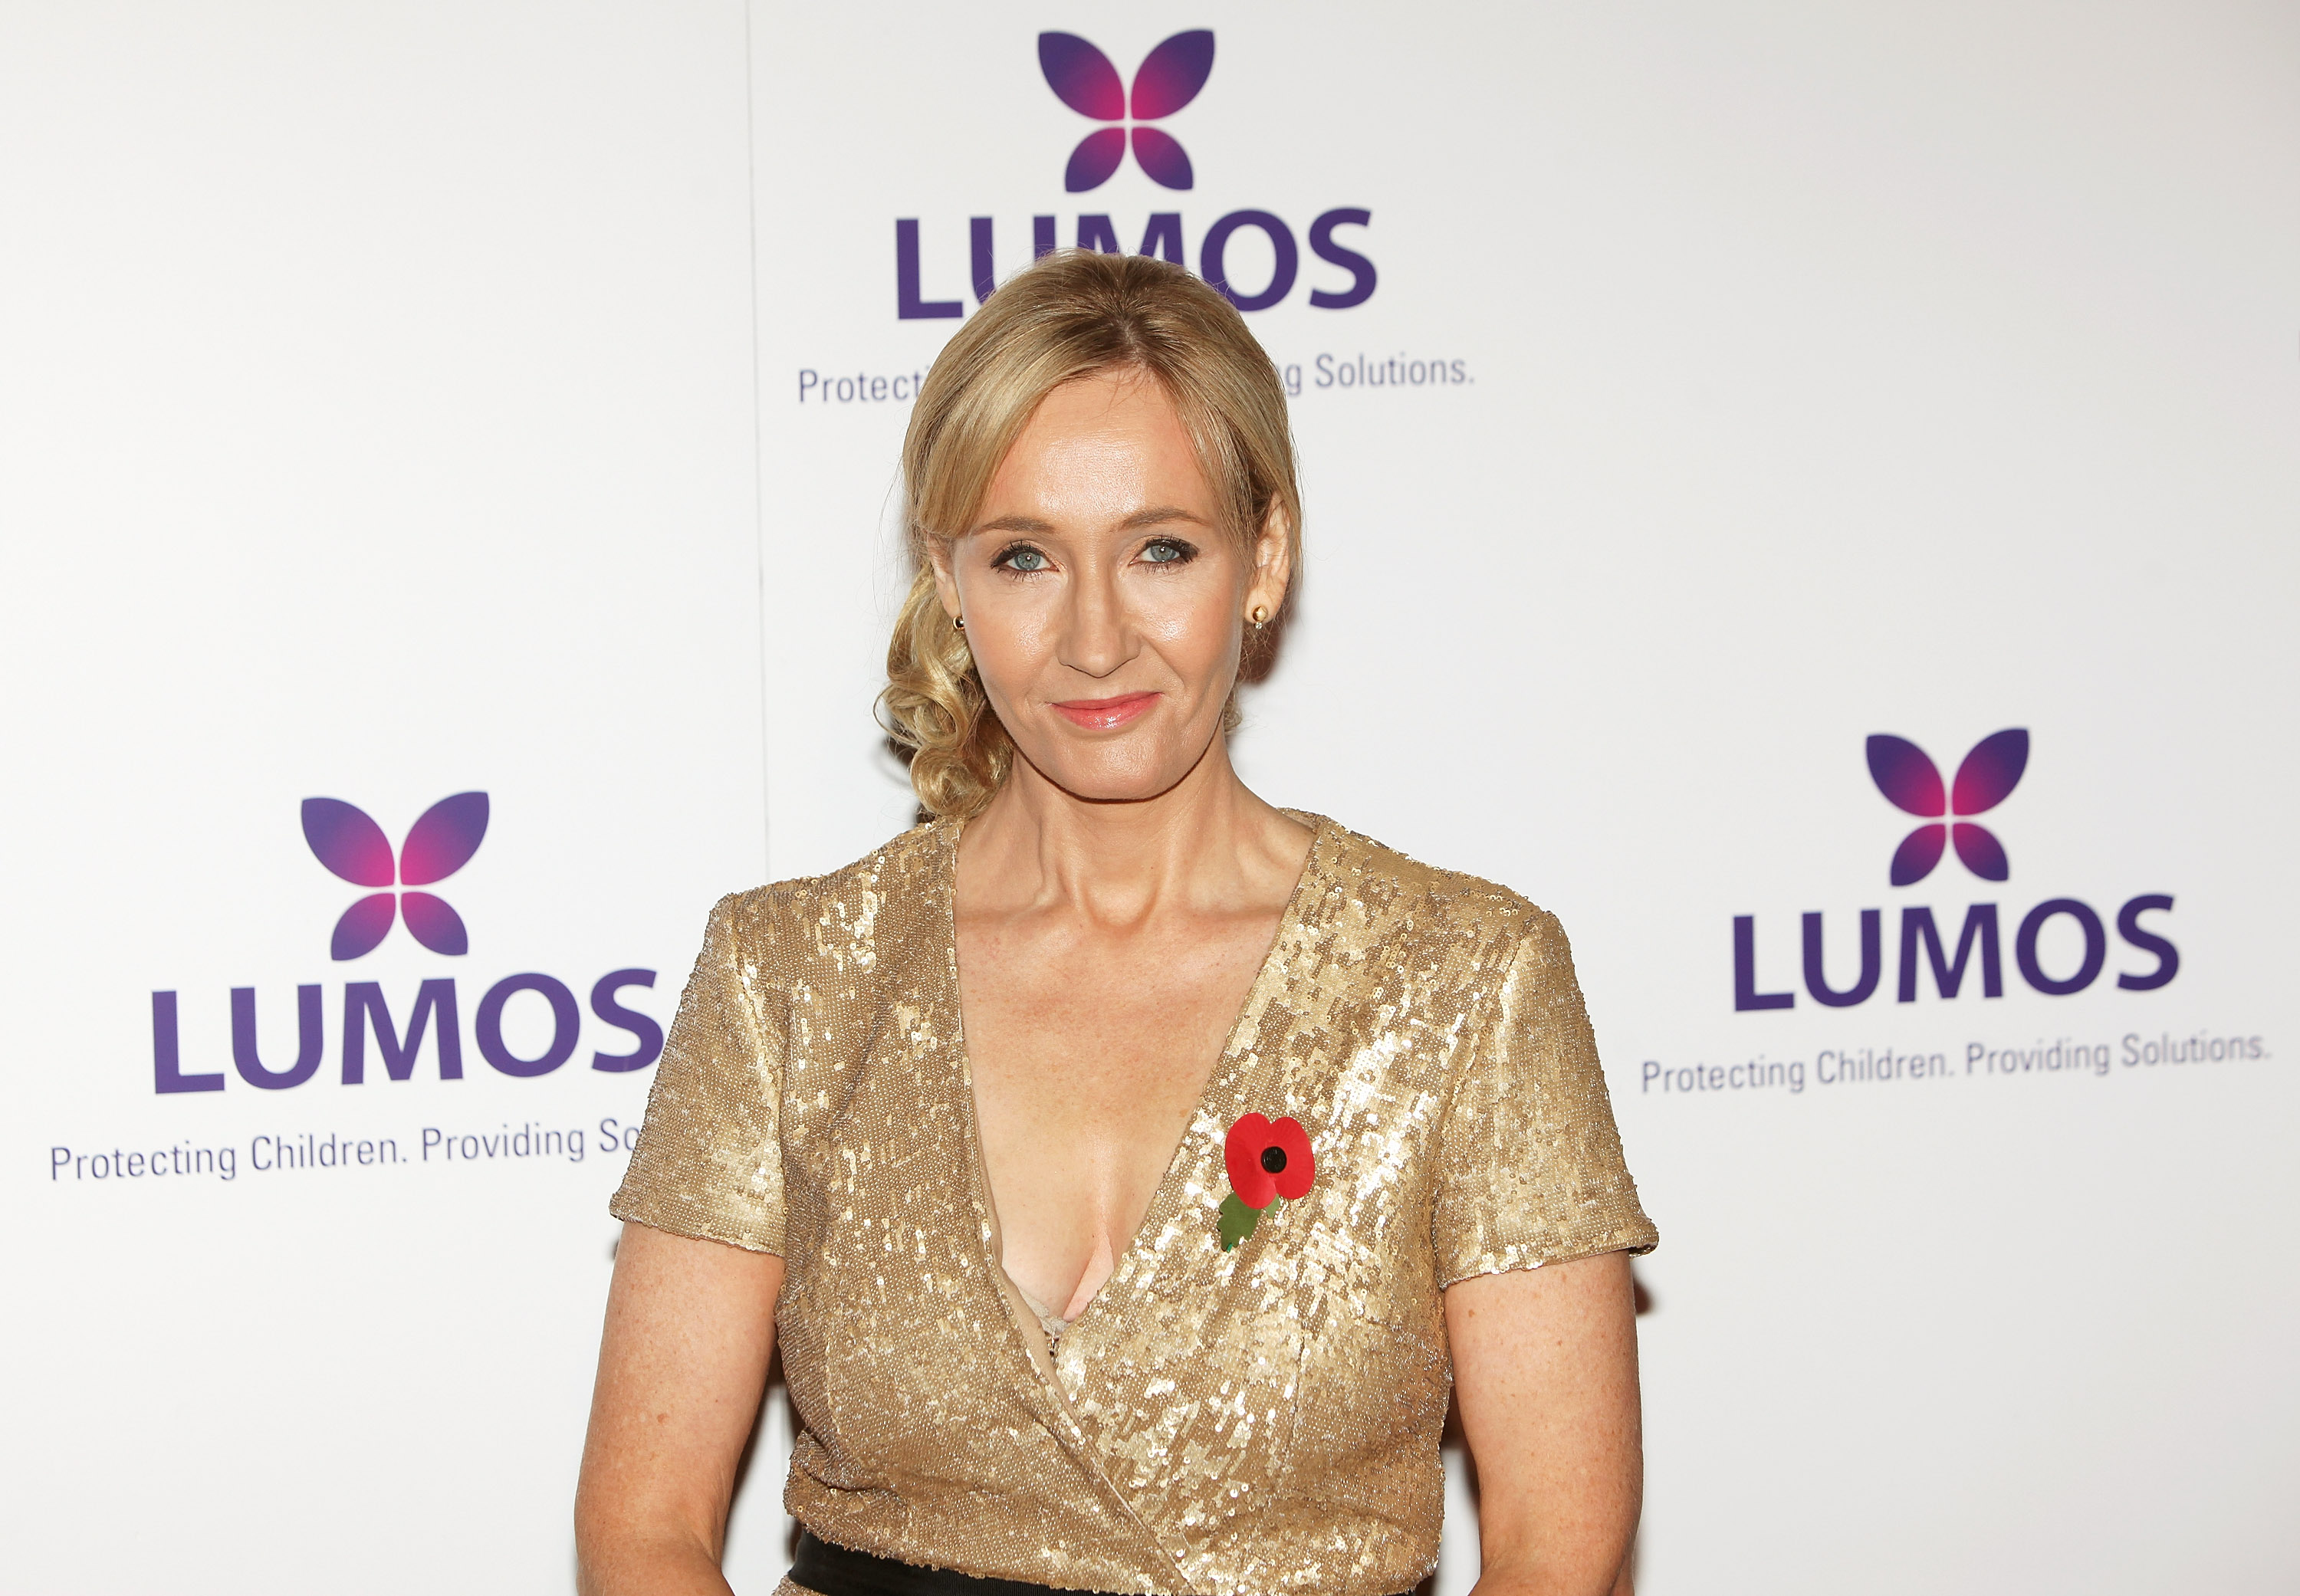 J.K. Rowling attends the Lumos fundraising event hosted by J.K. Rowling at The Warner Bros. Harry Potter Tour on November 9, 2013 in London, England. (David M. Benett/Getty Images)